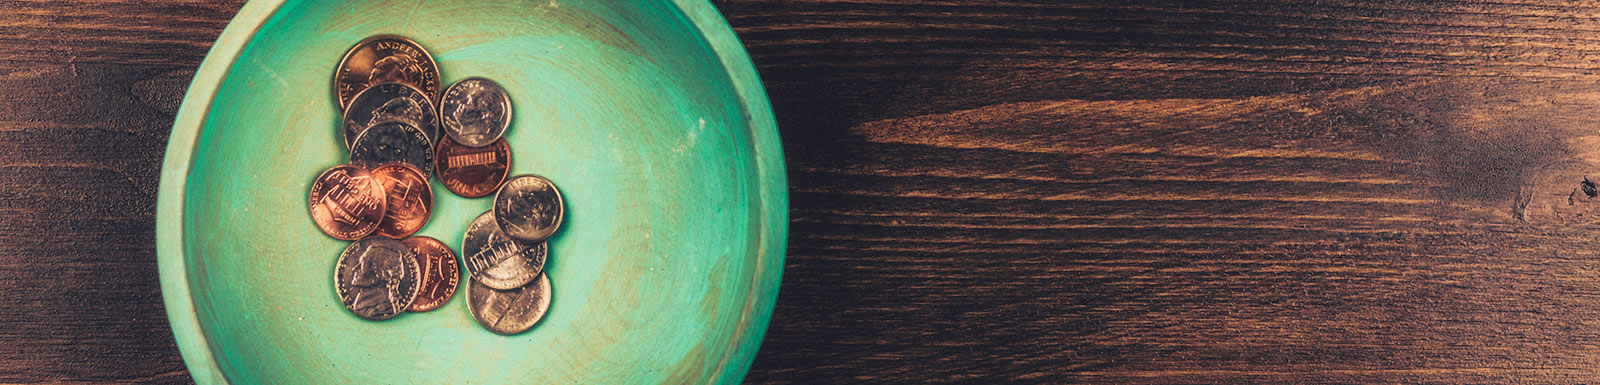 Coins in teal dish